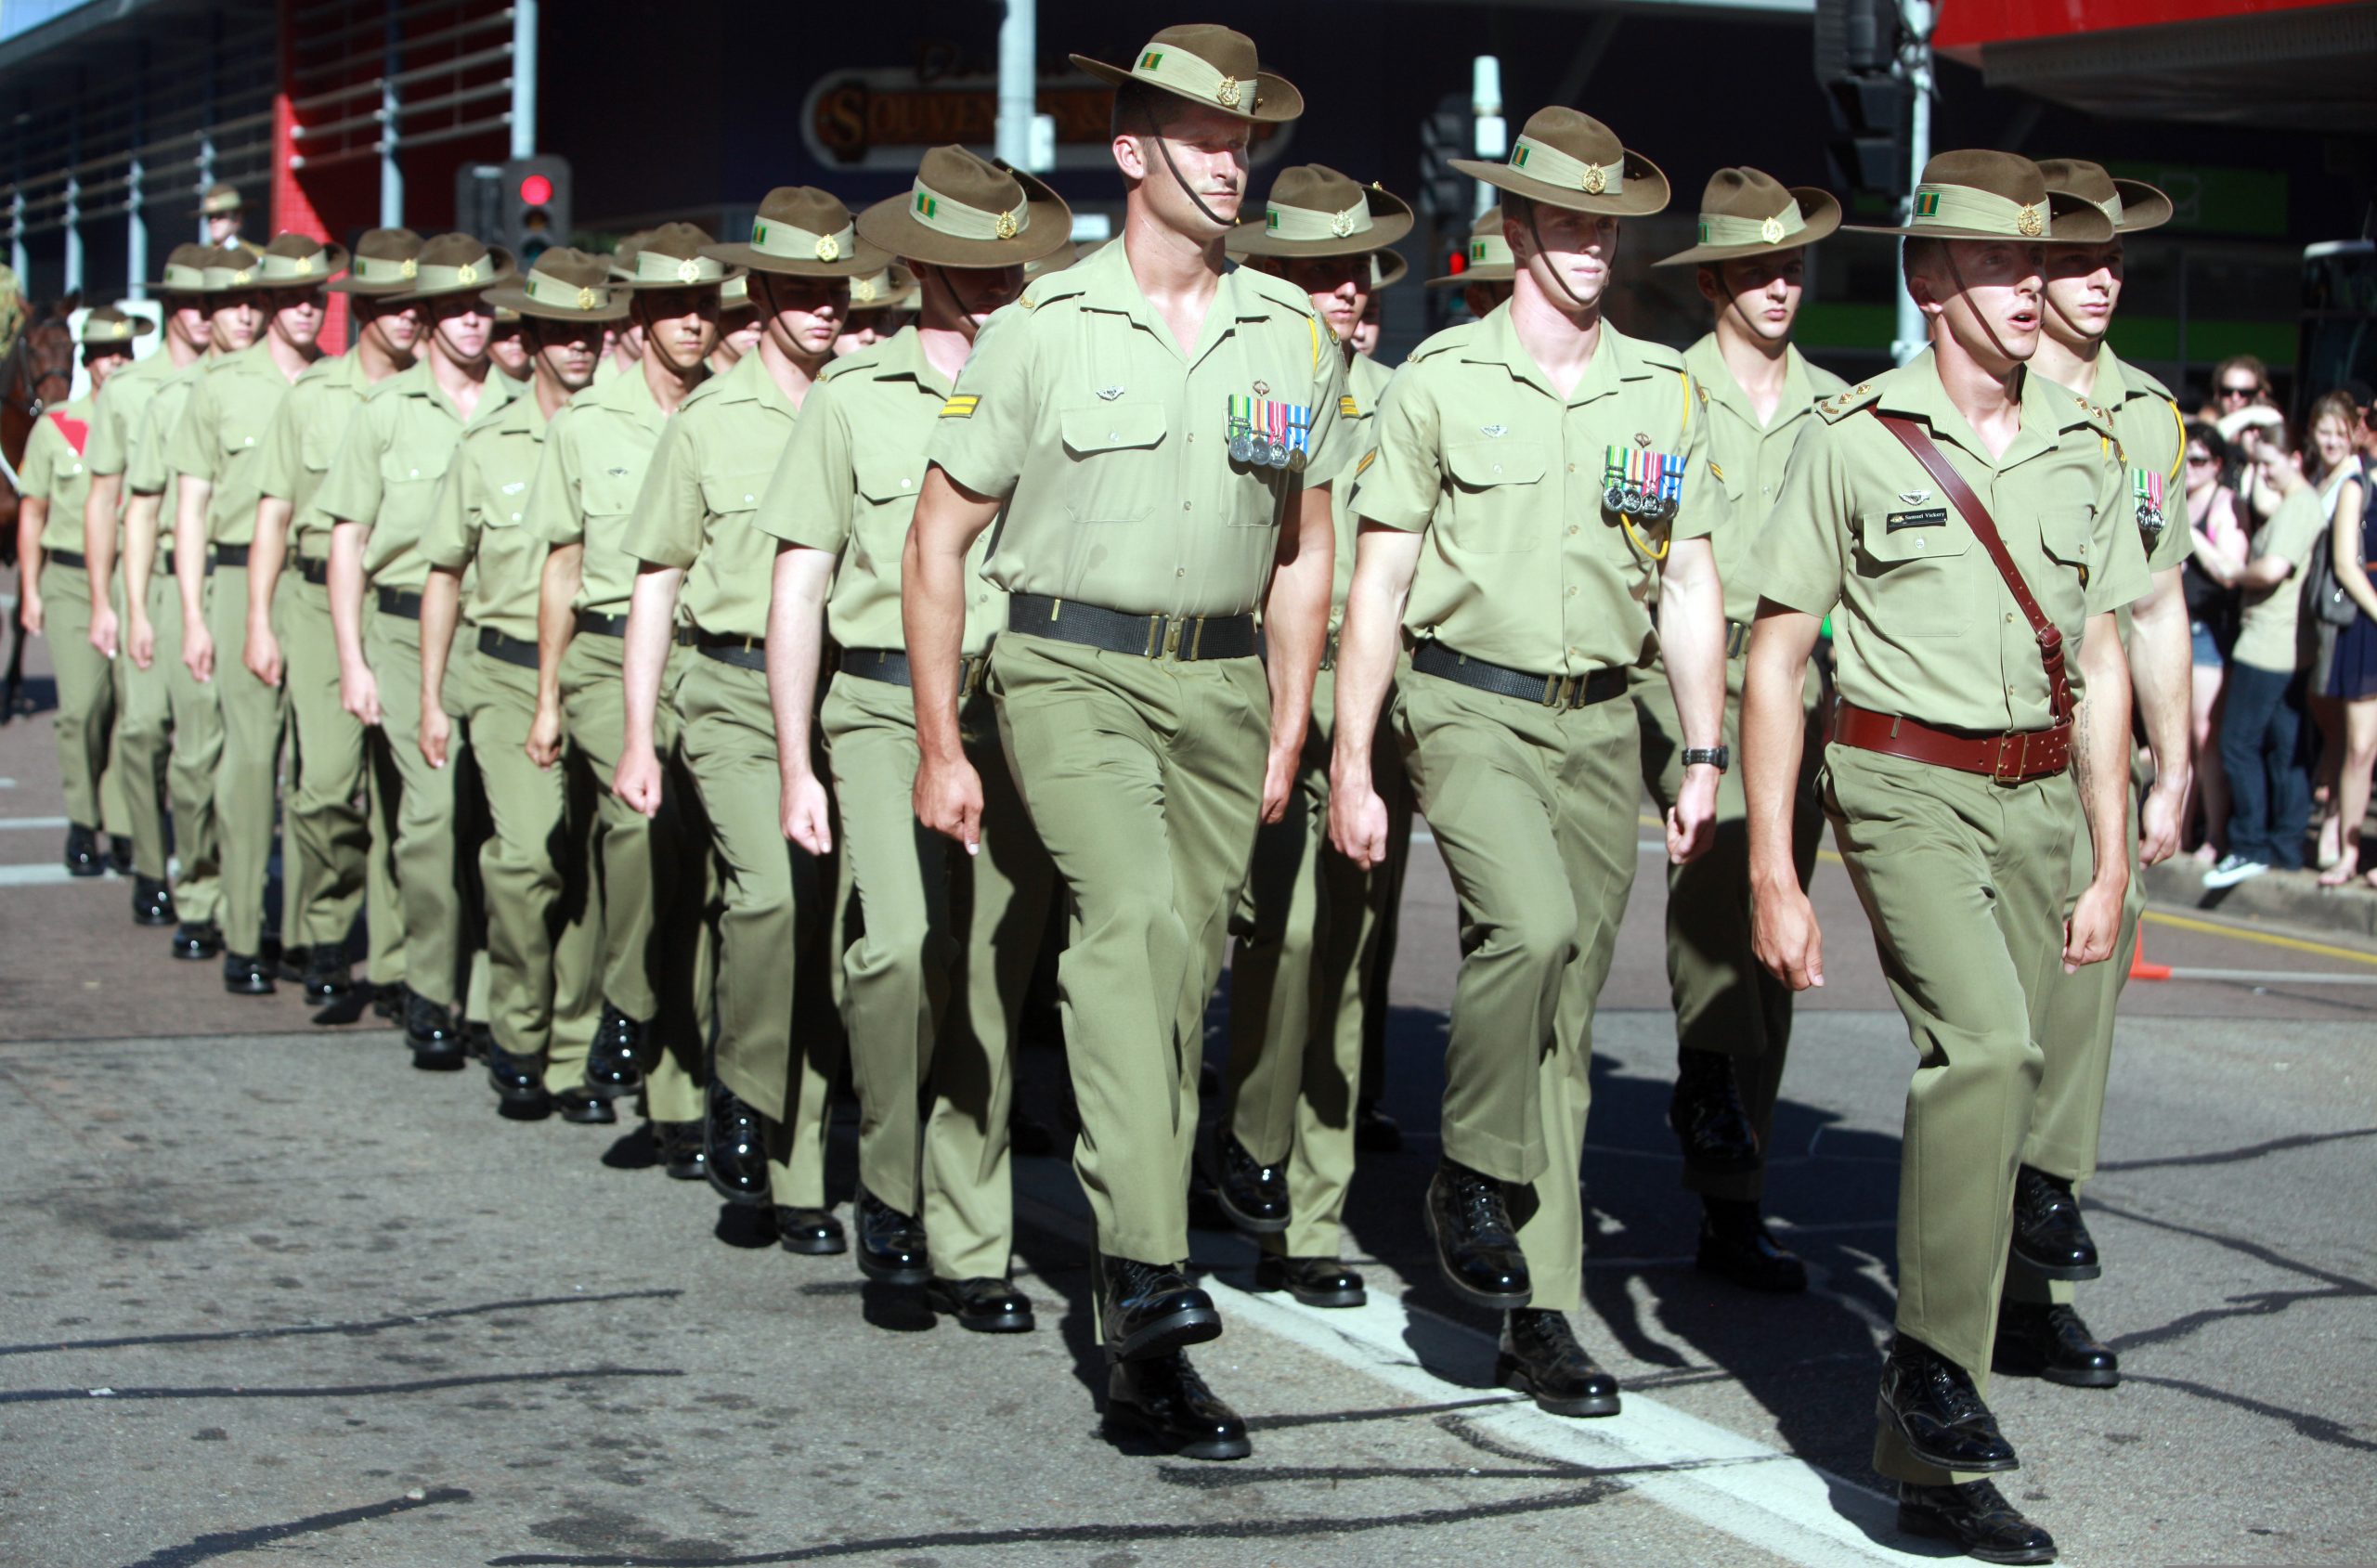 Australian_soldiers_with_the_5th_Battalion_Royal_Australian_Regiment_march_in_an_Anzac_Day_parade_in_Darwin_Australia_April_25_2013_130425-M-AL626-013-scaled.jpg